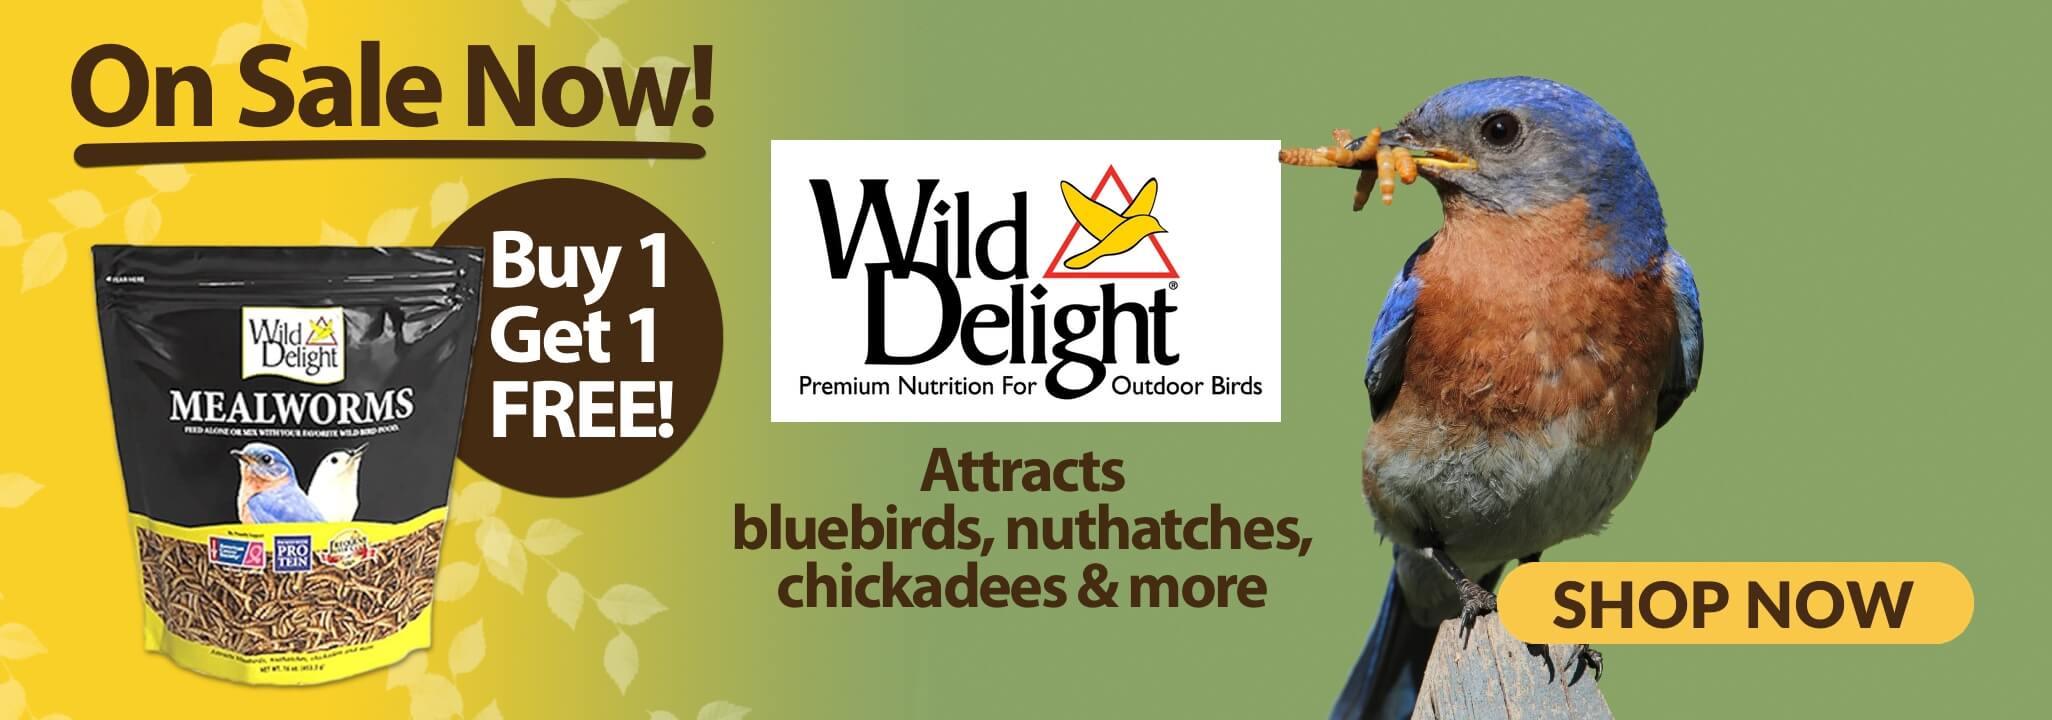 On Sale Now Wild Delight Mealworms Buy 1 Get 1 Free Attracts bluebirds, nuthatches, chickadees, and more Shop Now